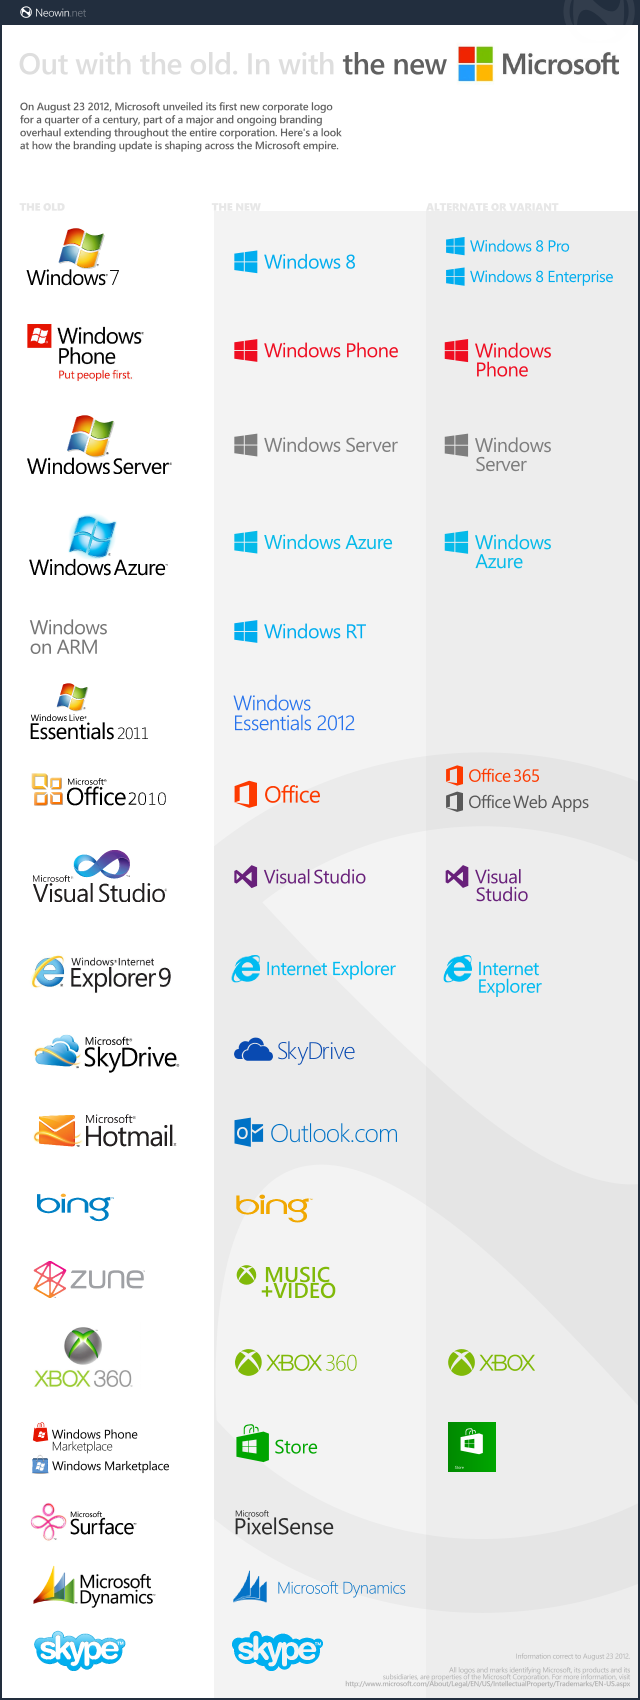 https://www.neowin.net/images/uploaded/microsoft-brand-family-2012-4.png